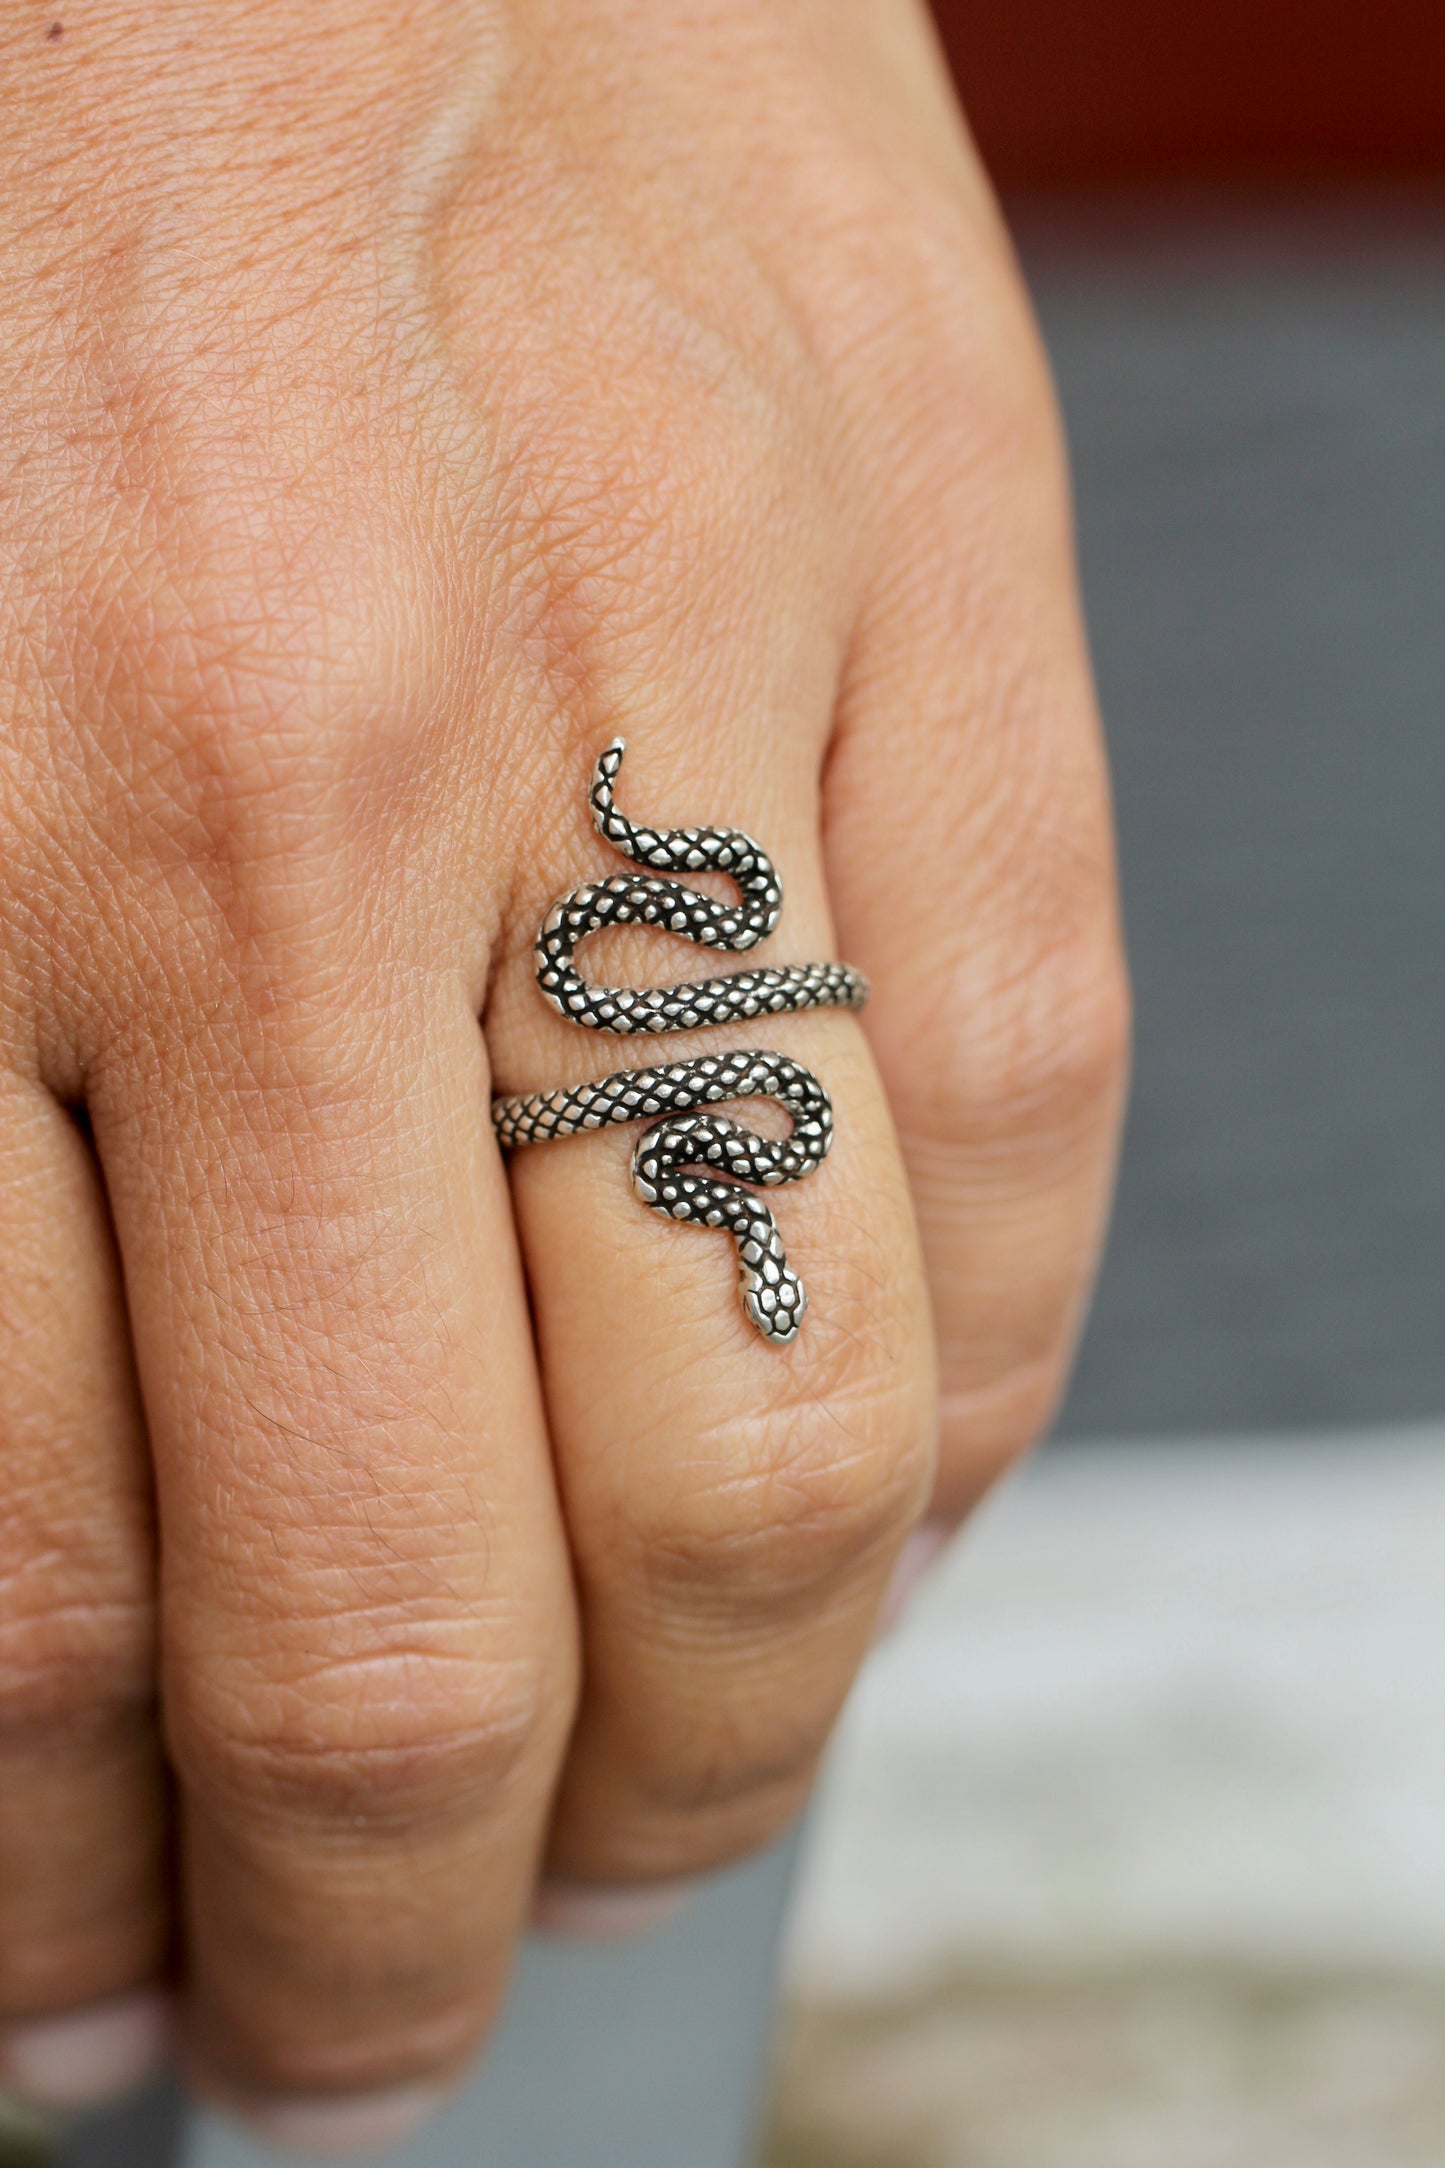 Textured Silver Snake RIng